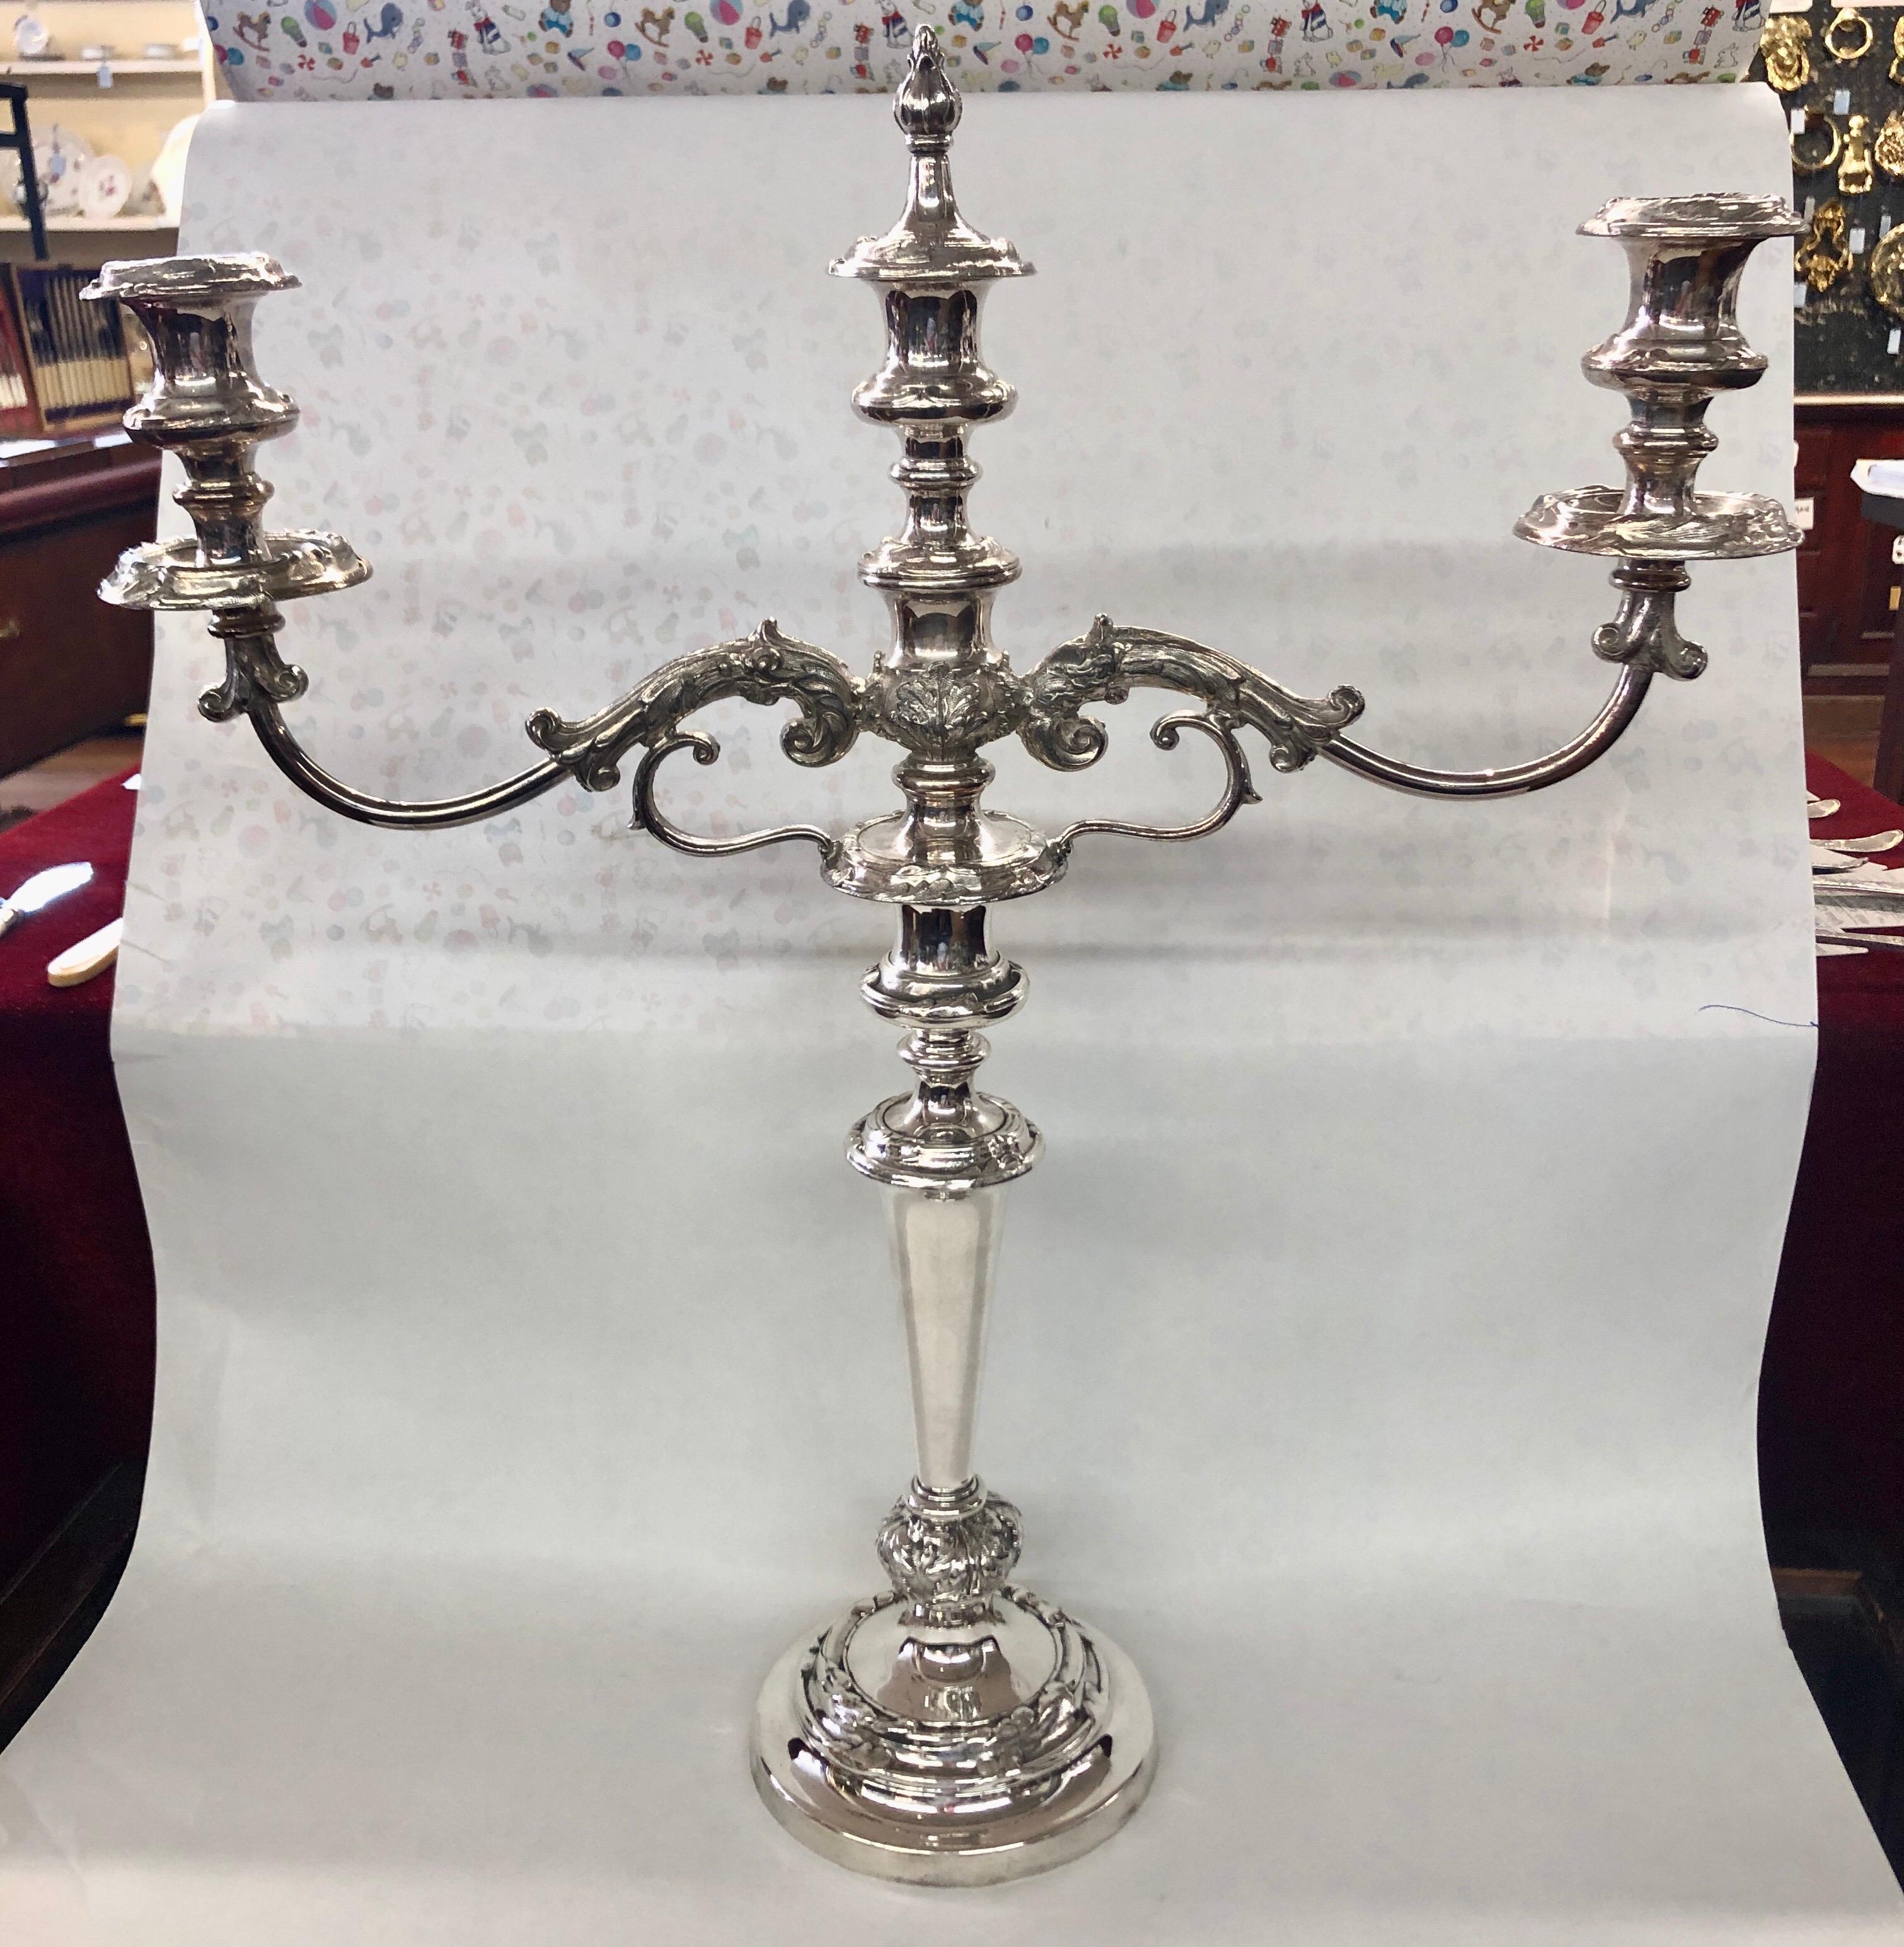 Pair of exceptional quality antique English “Old Sheffield Plate” three-light rococo style candelabra with central snuffer flame finial which is removable to reveal a center candle. The rococo bobeches are original and removable and the candelabra